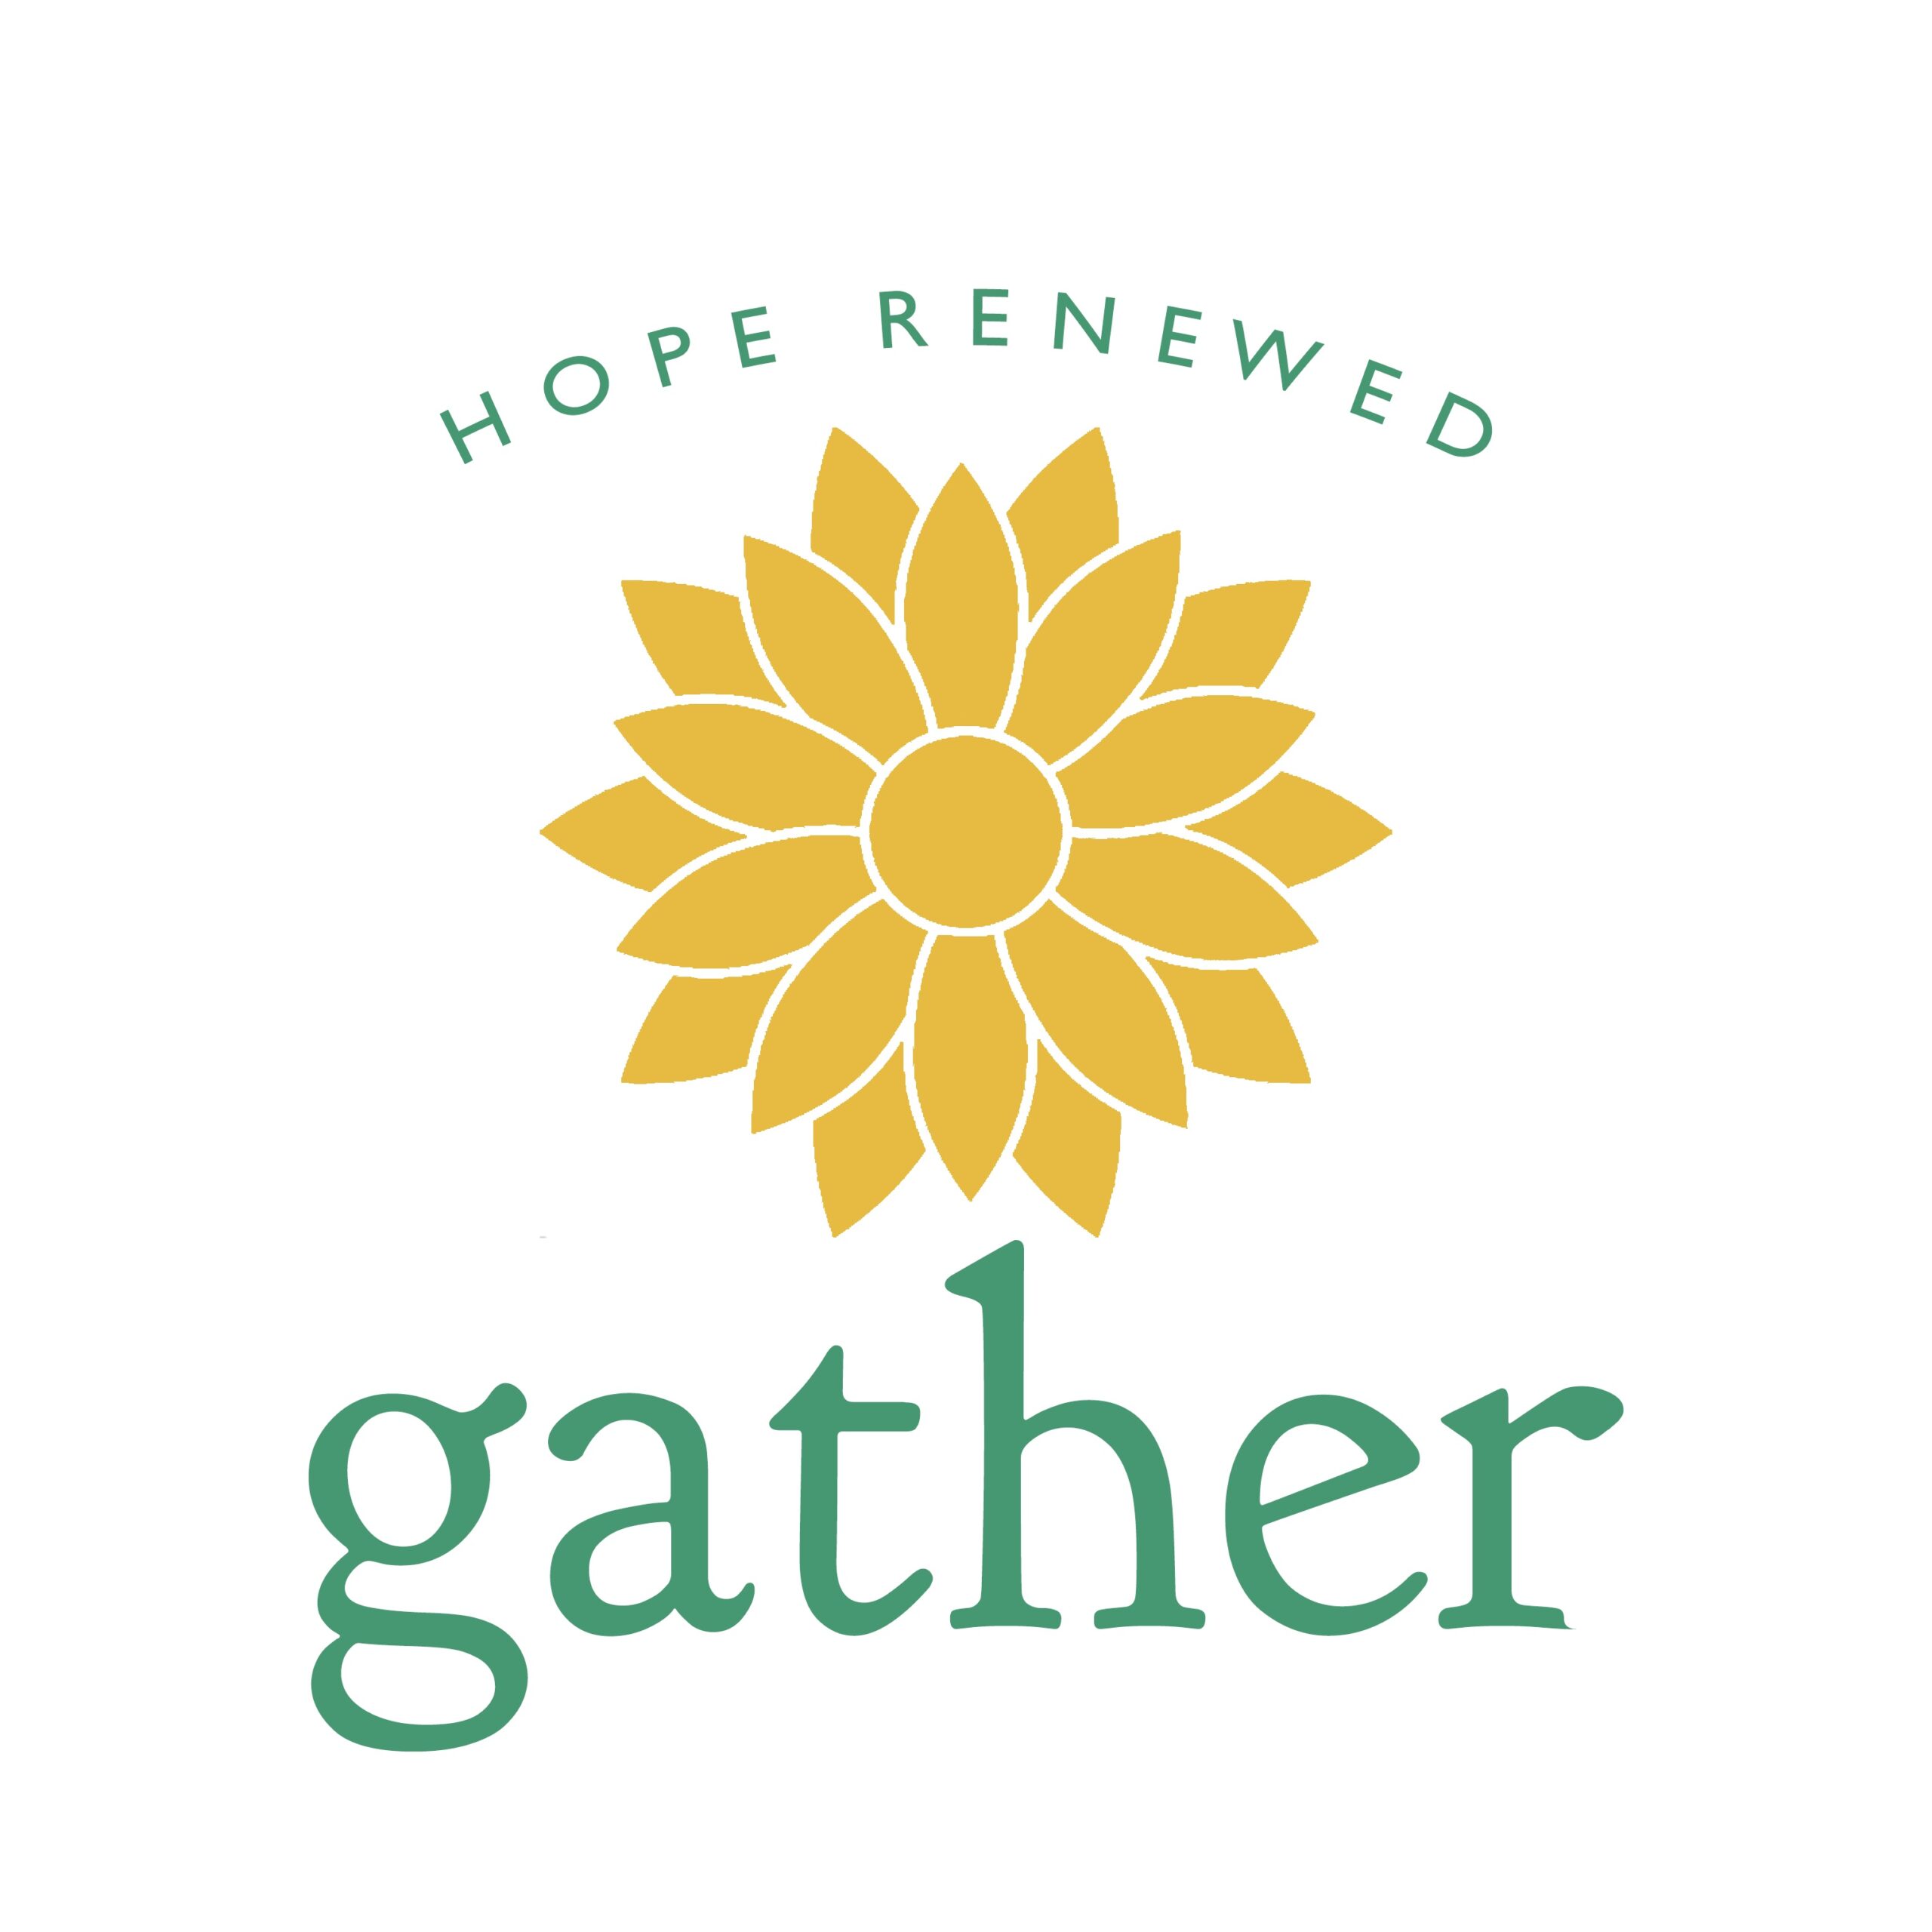 Gather is the Diocese of Bethlehem’s annual formation event.